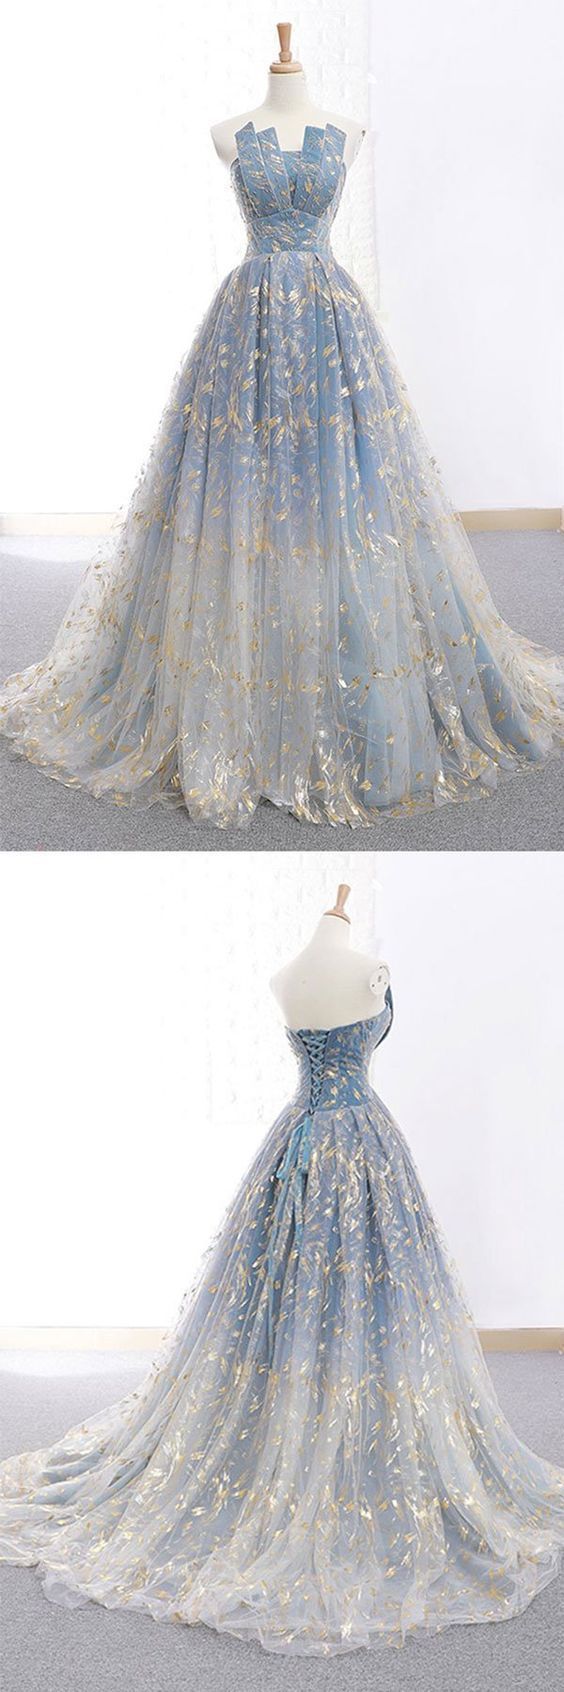 Buy Sky Blue and Gold Five Star Nett Gown | Gowns